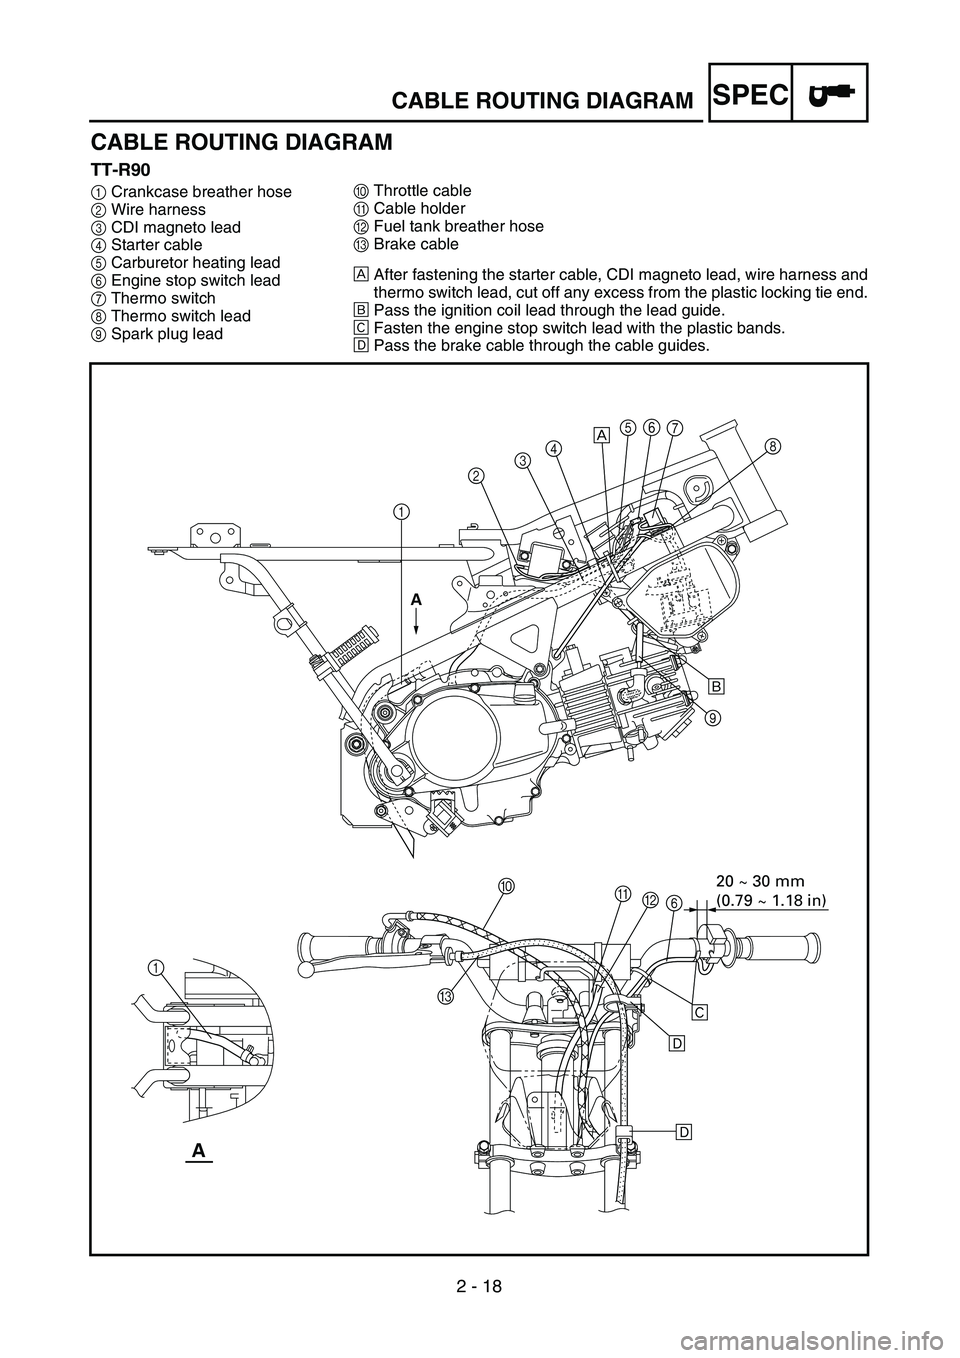 YAMAHA TTR90 2005  Notices Demploi (in French) 2 - 18
SPEC
CABLE ROUTING DIAGRAM
TT-R90
1Crankcase breather hose
2Wire harness
3CDI magneto lead
4Starter cable
5Carburetor heating lead
6Engine stop switch lead
7Thermo switch
8Thermo switch lead
9S